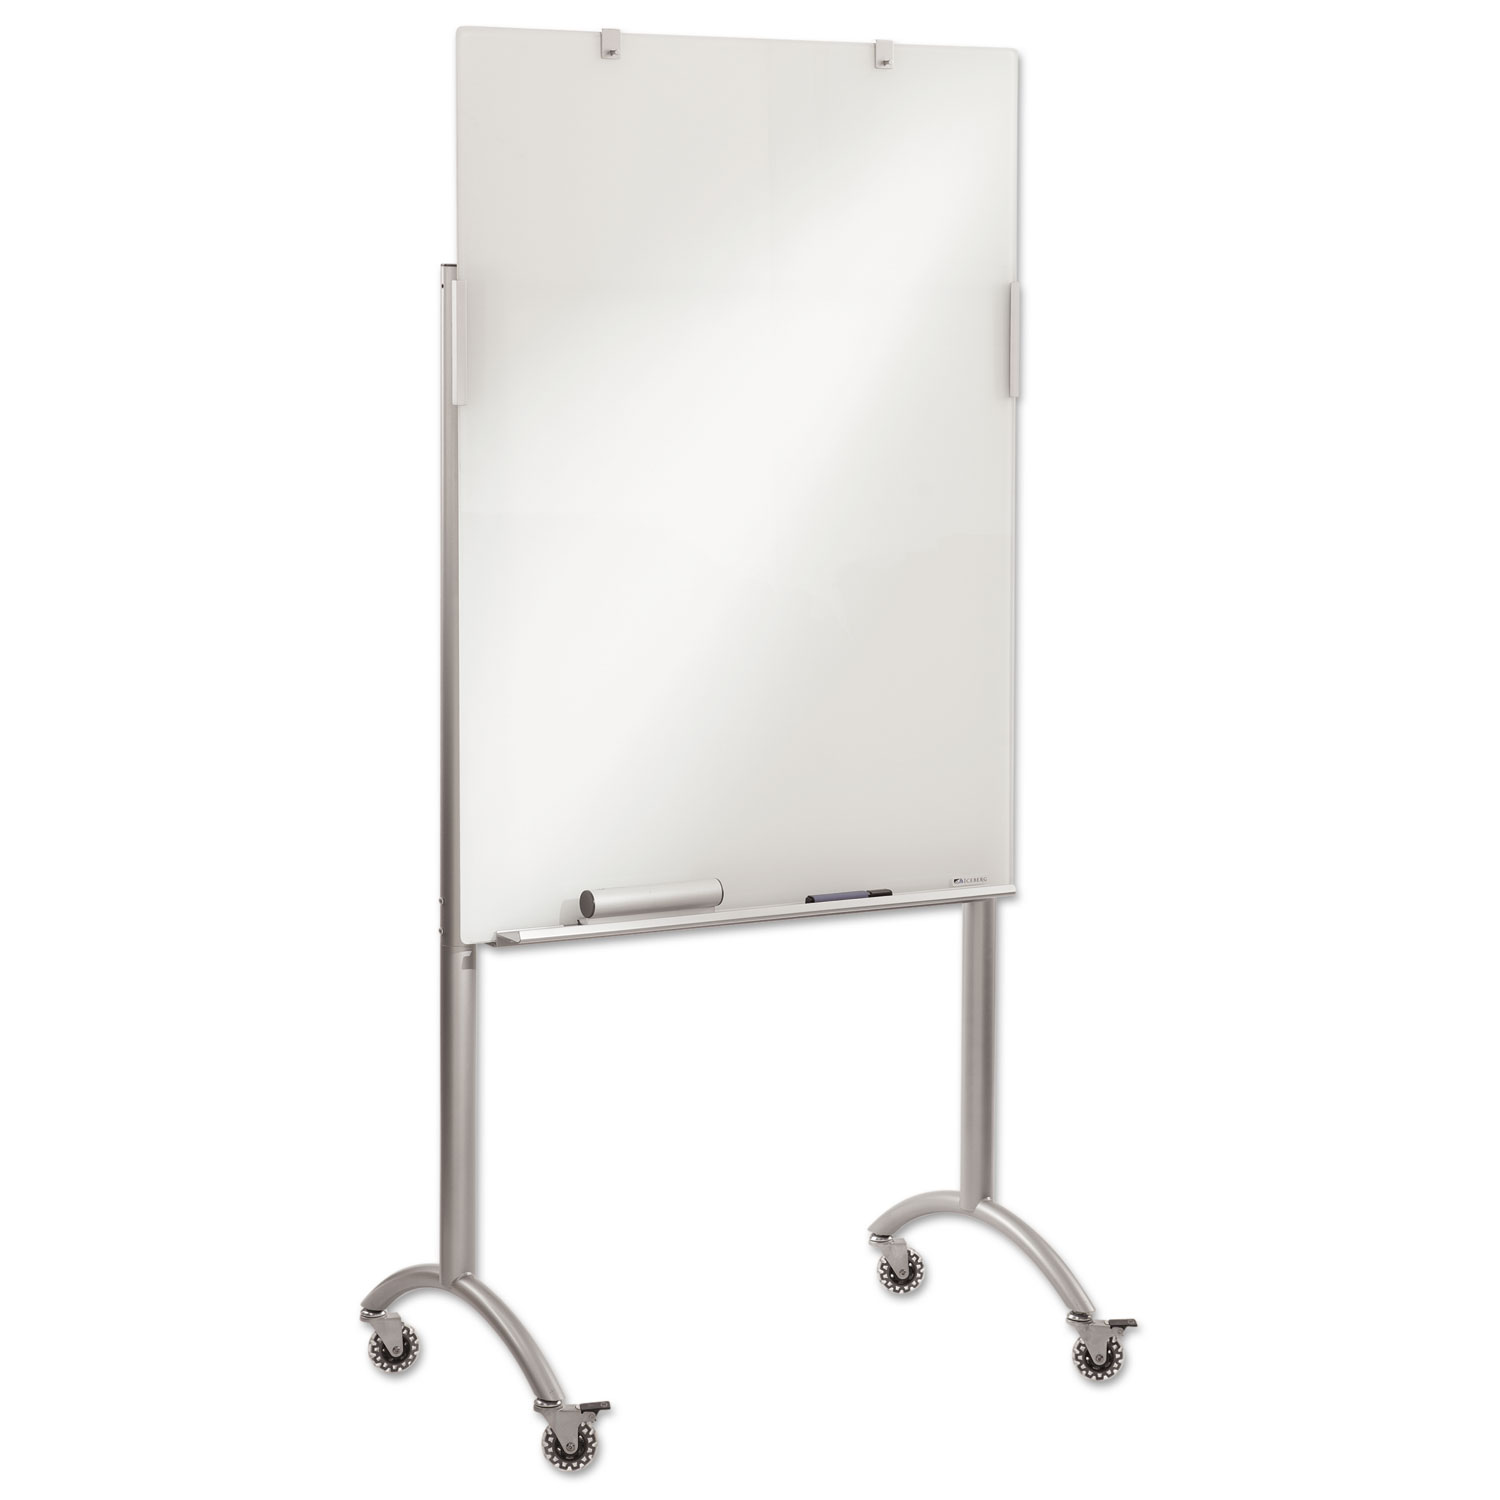 Clarity Glass Mobile Presentation Easel, 36 x 48 x 72, Glass/Steel